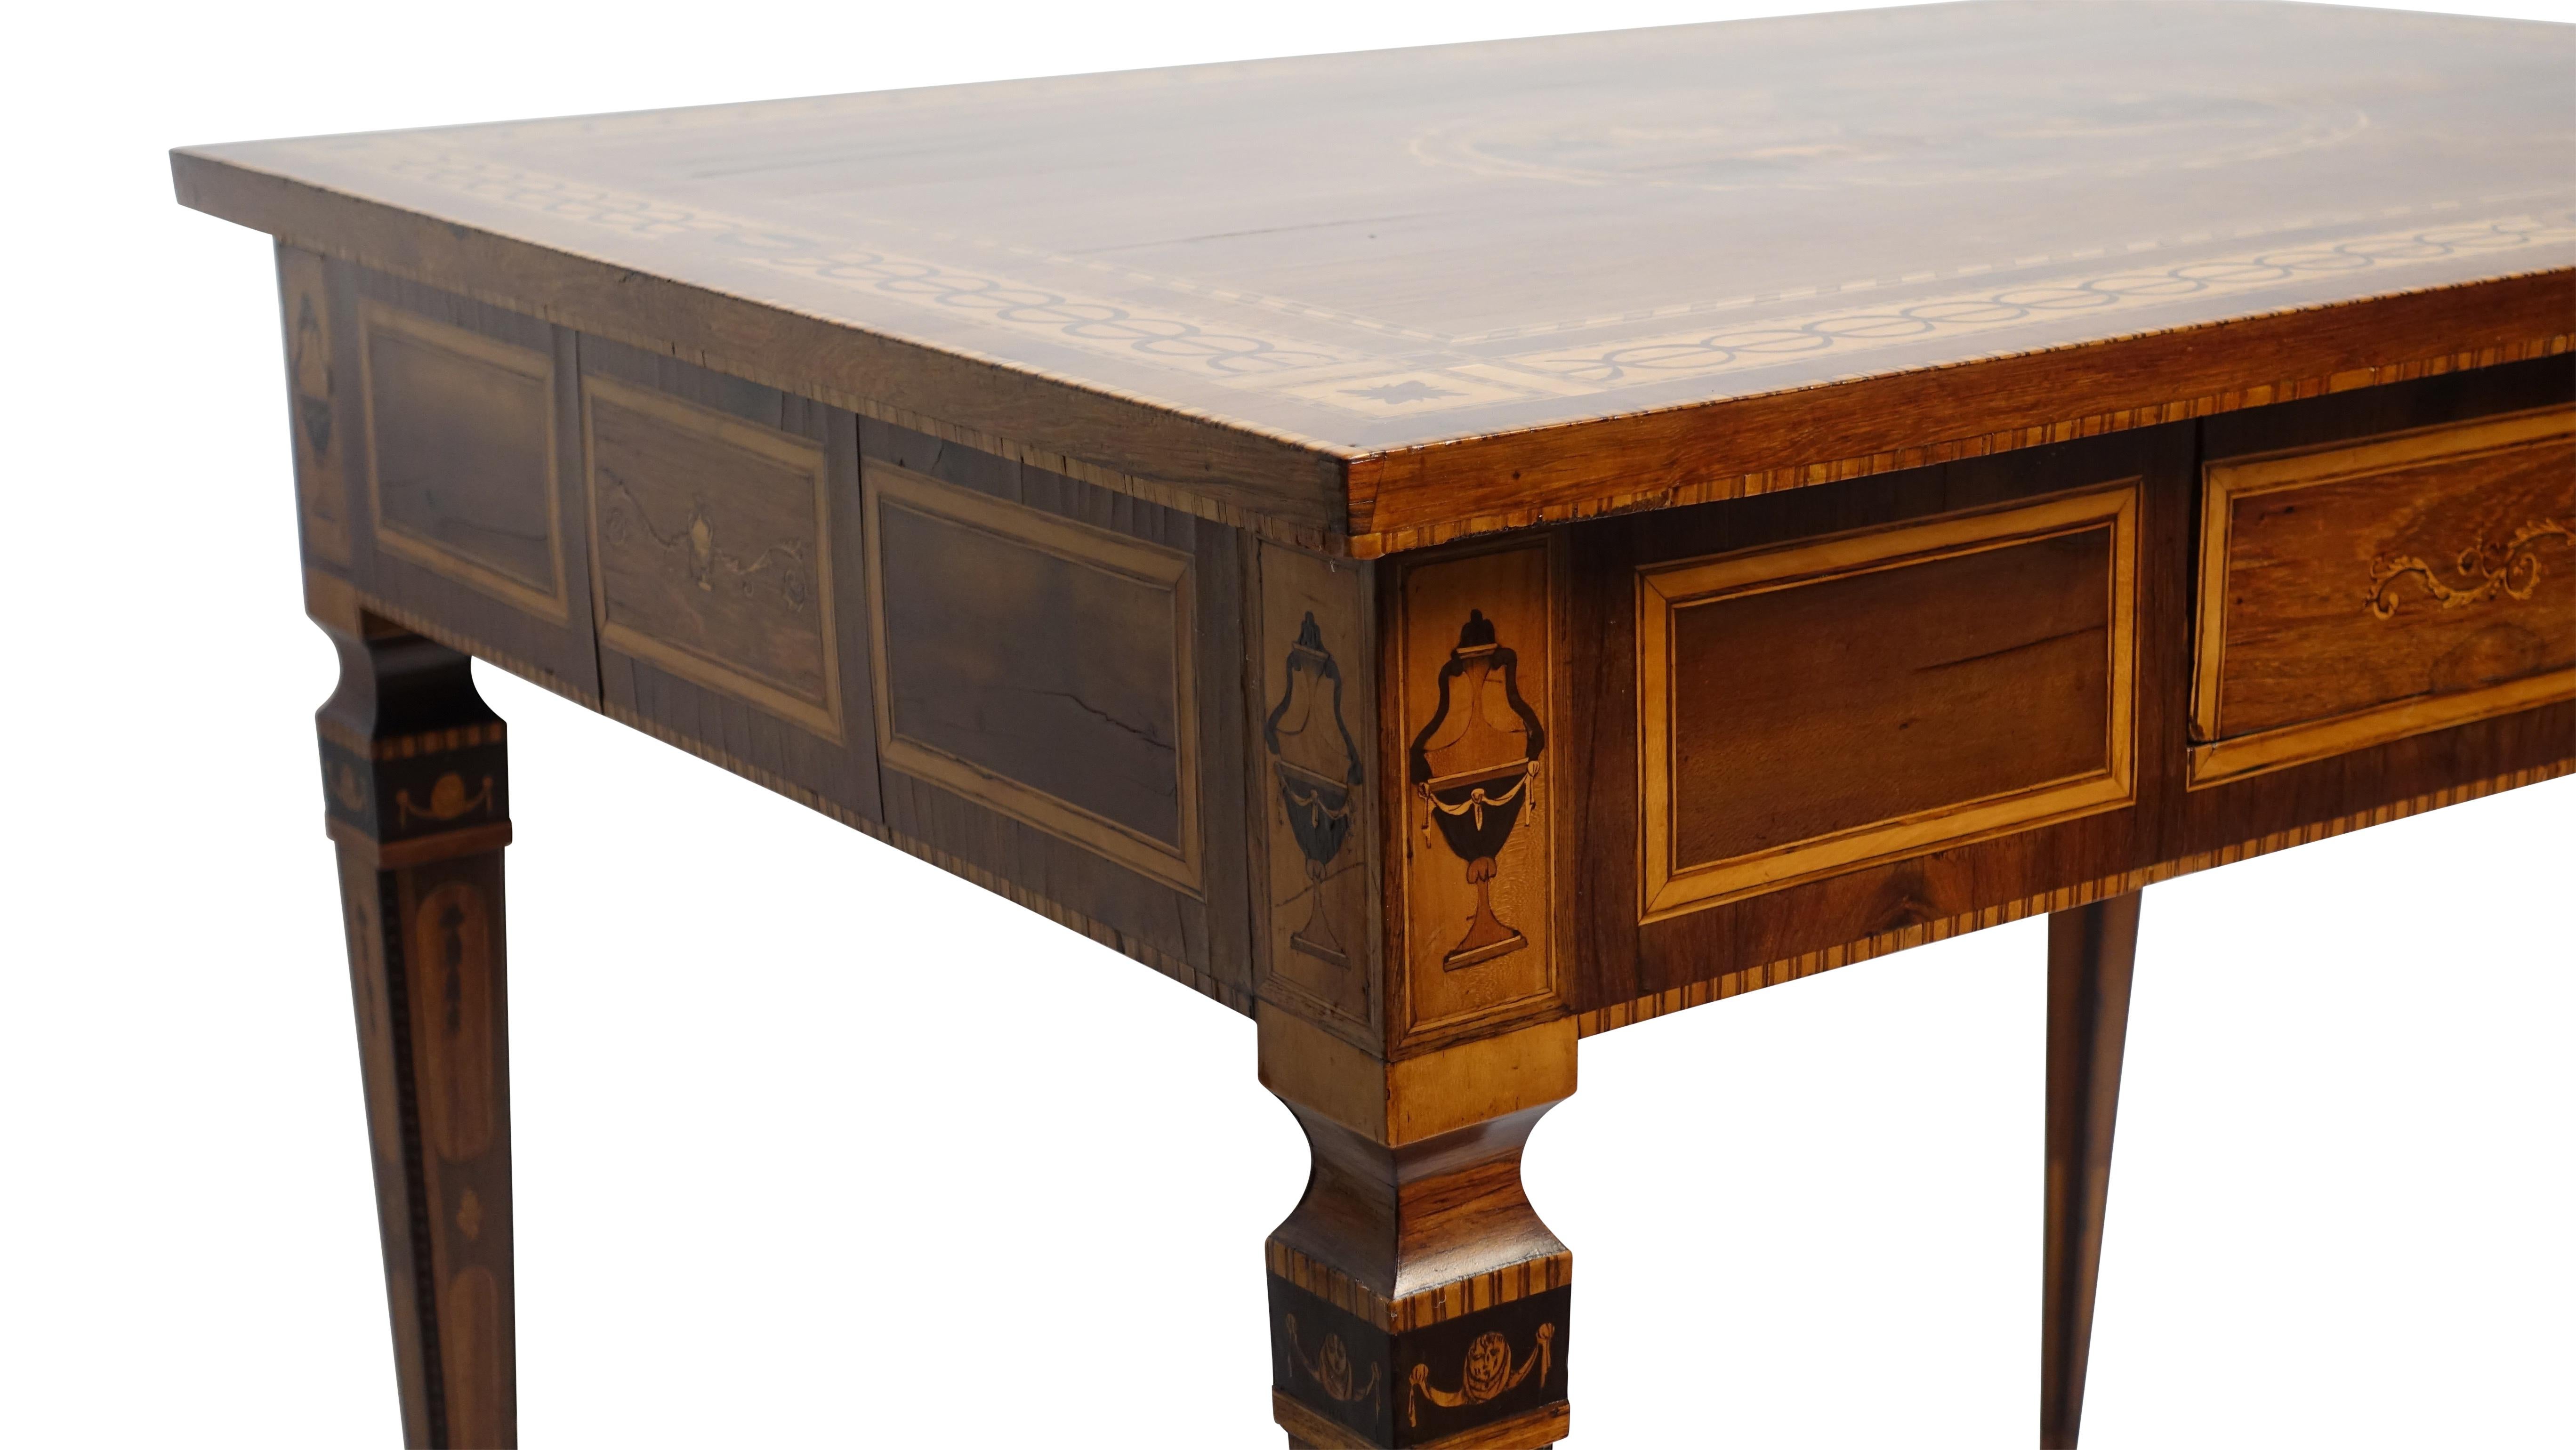 Mixed Woods Marquetry Inlaid Writing Table, Northern Italian, Late 18th Century For Sale 10